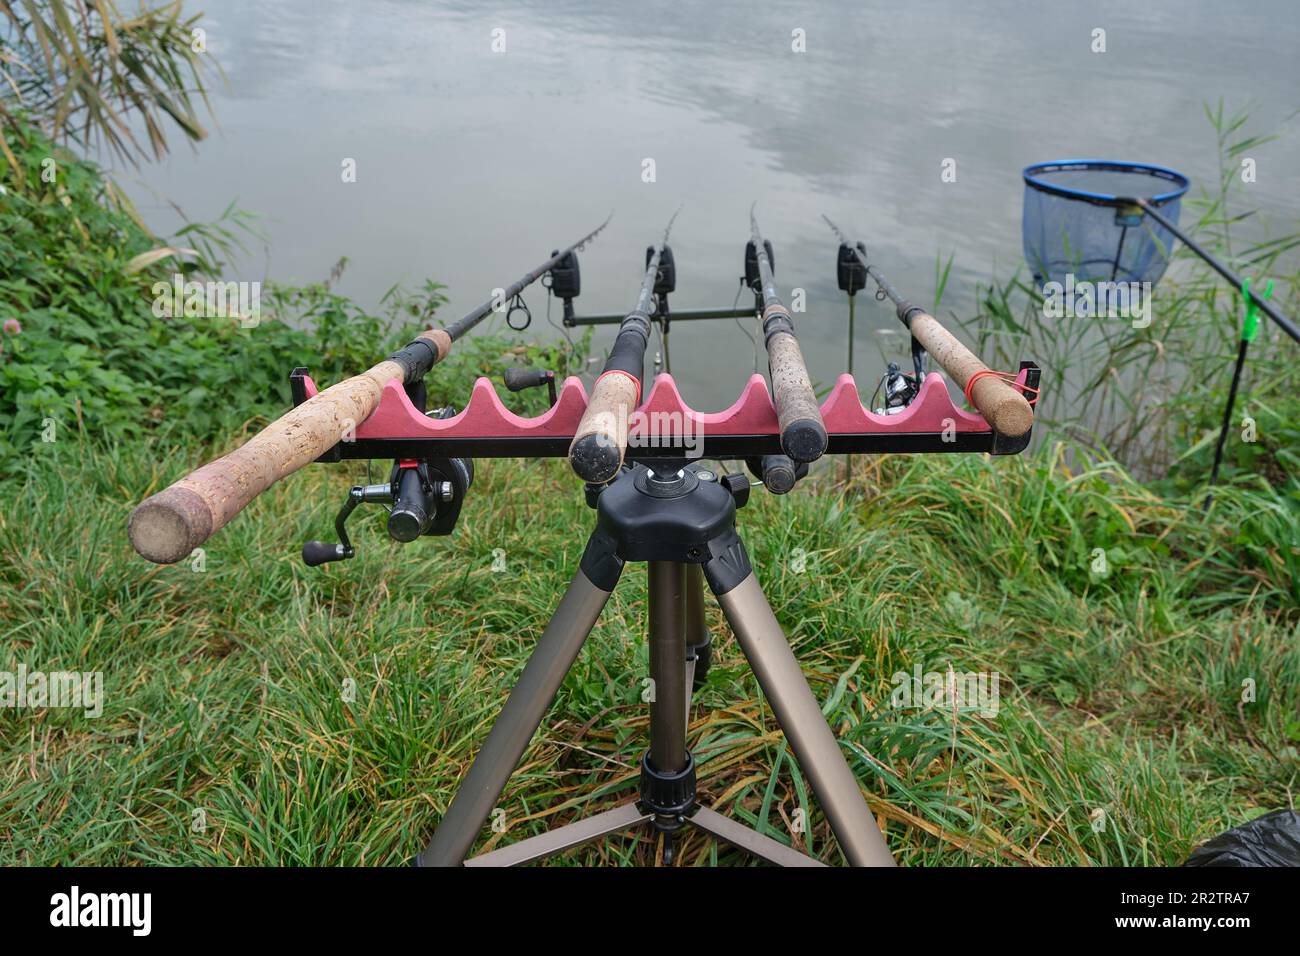 https://c8.alamy.com/comp/2R2TRA7/four-carp-feeder-rods-on-a-rod-pod-stand-with-electronic-alarms-near-the-lake-during-the-day-back-pocket-fishing-hobbies-outdoor-recreation-2R2TRA7.jpg